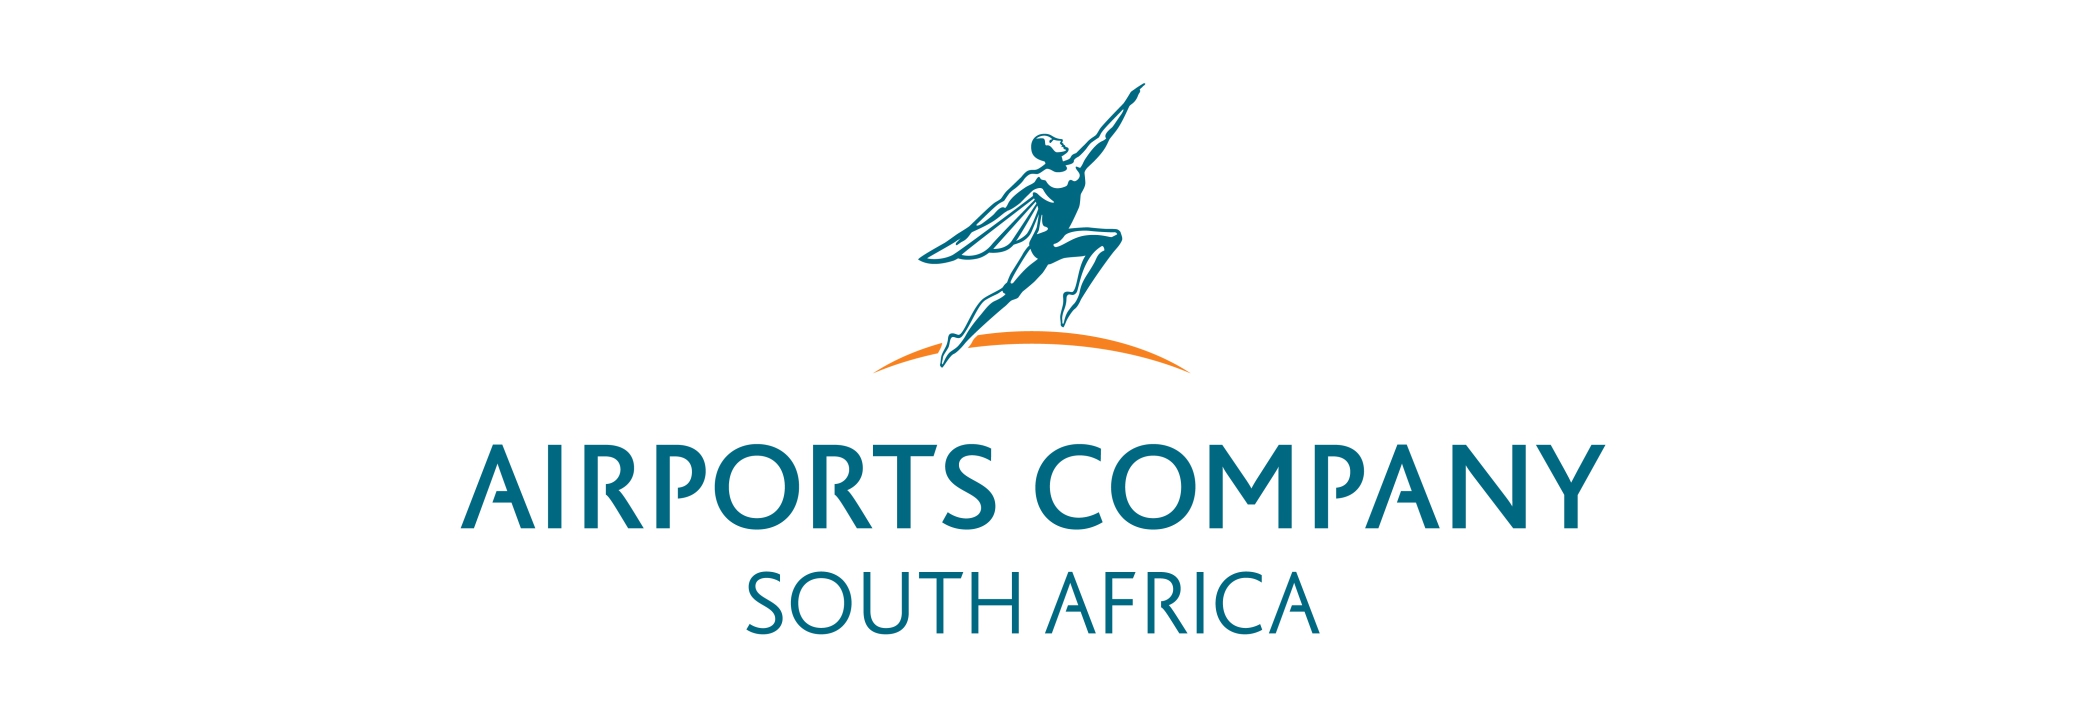 https://poswainc.com/wp-content/uploads/2020/04/Airports-Company-of-South-Africa.jpg